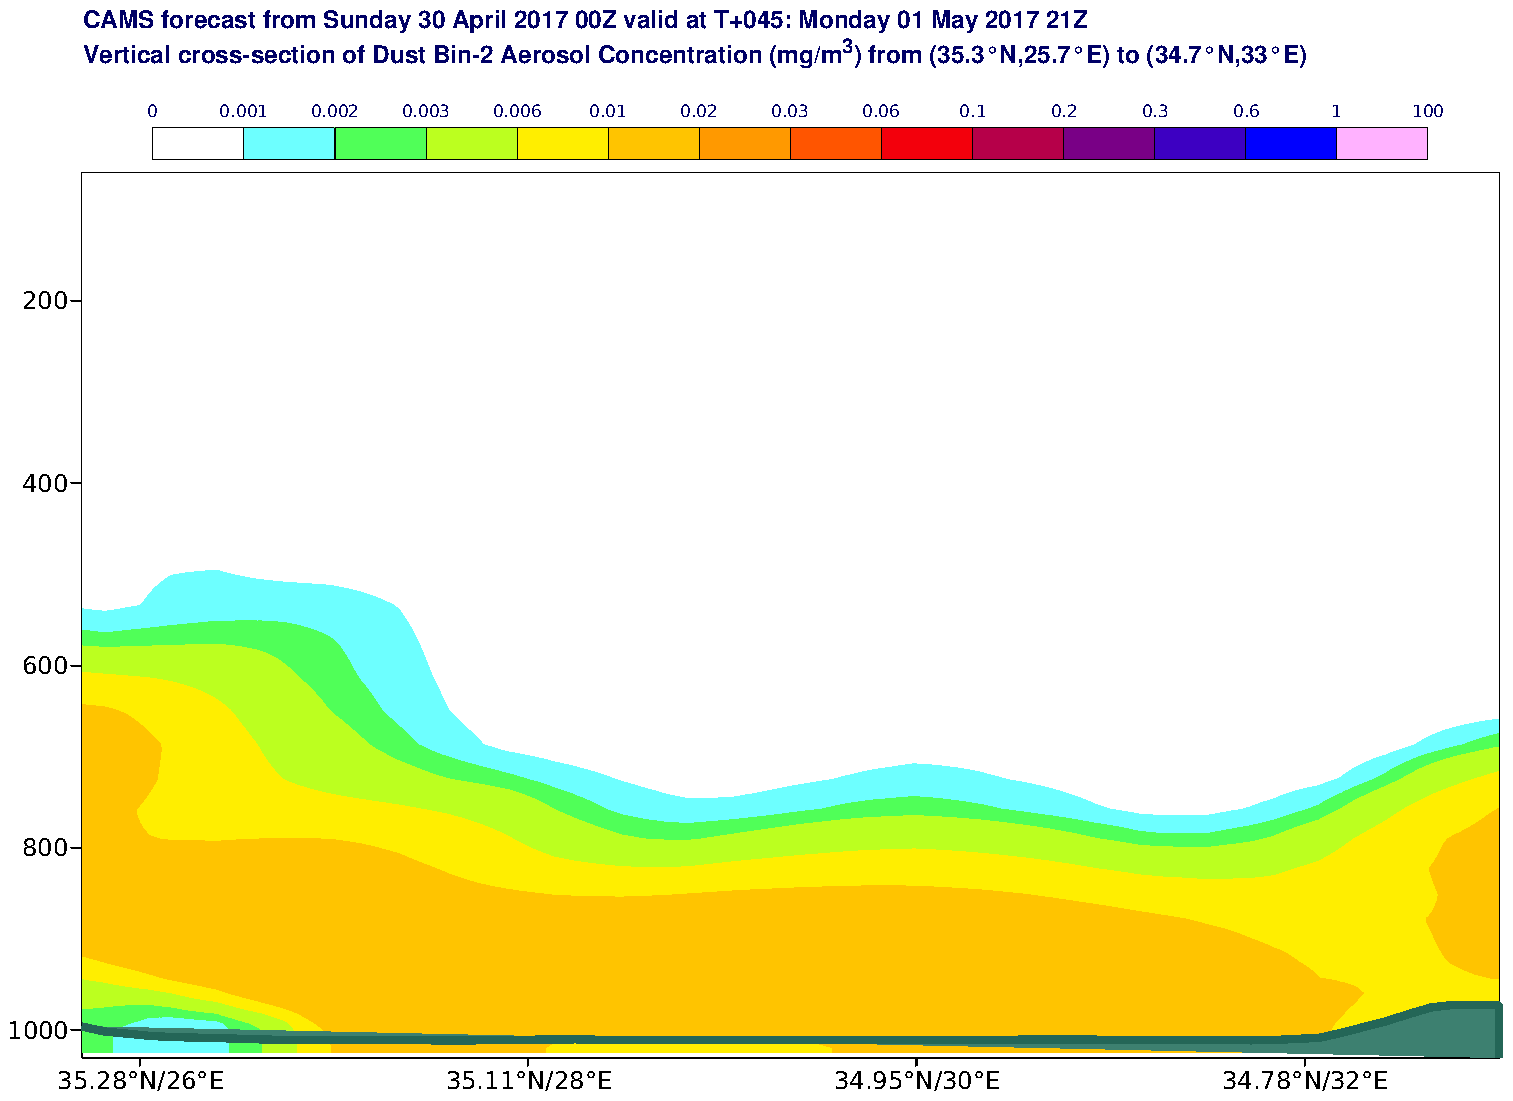 Vertical cross-section of Dust Bin-2 Aerosol Concentration (mg/m3) valid at T45 - 2017-05-01 21:00